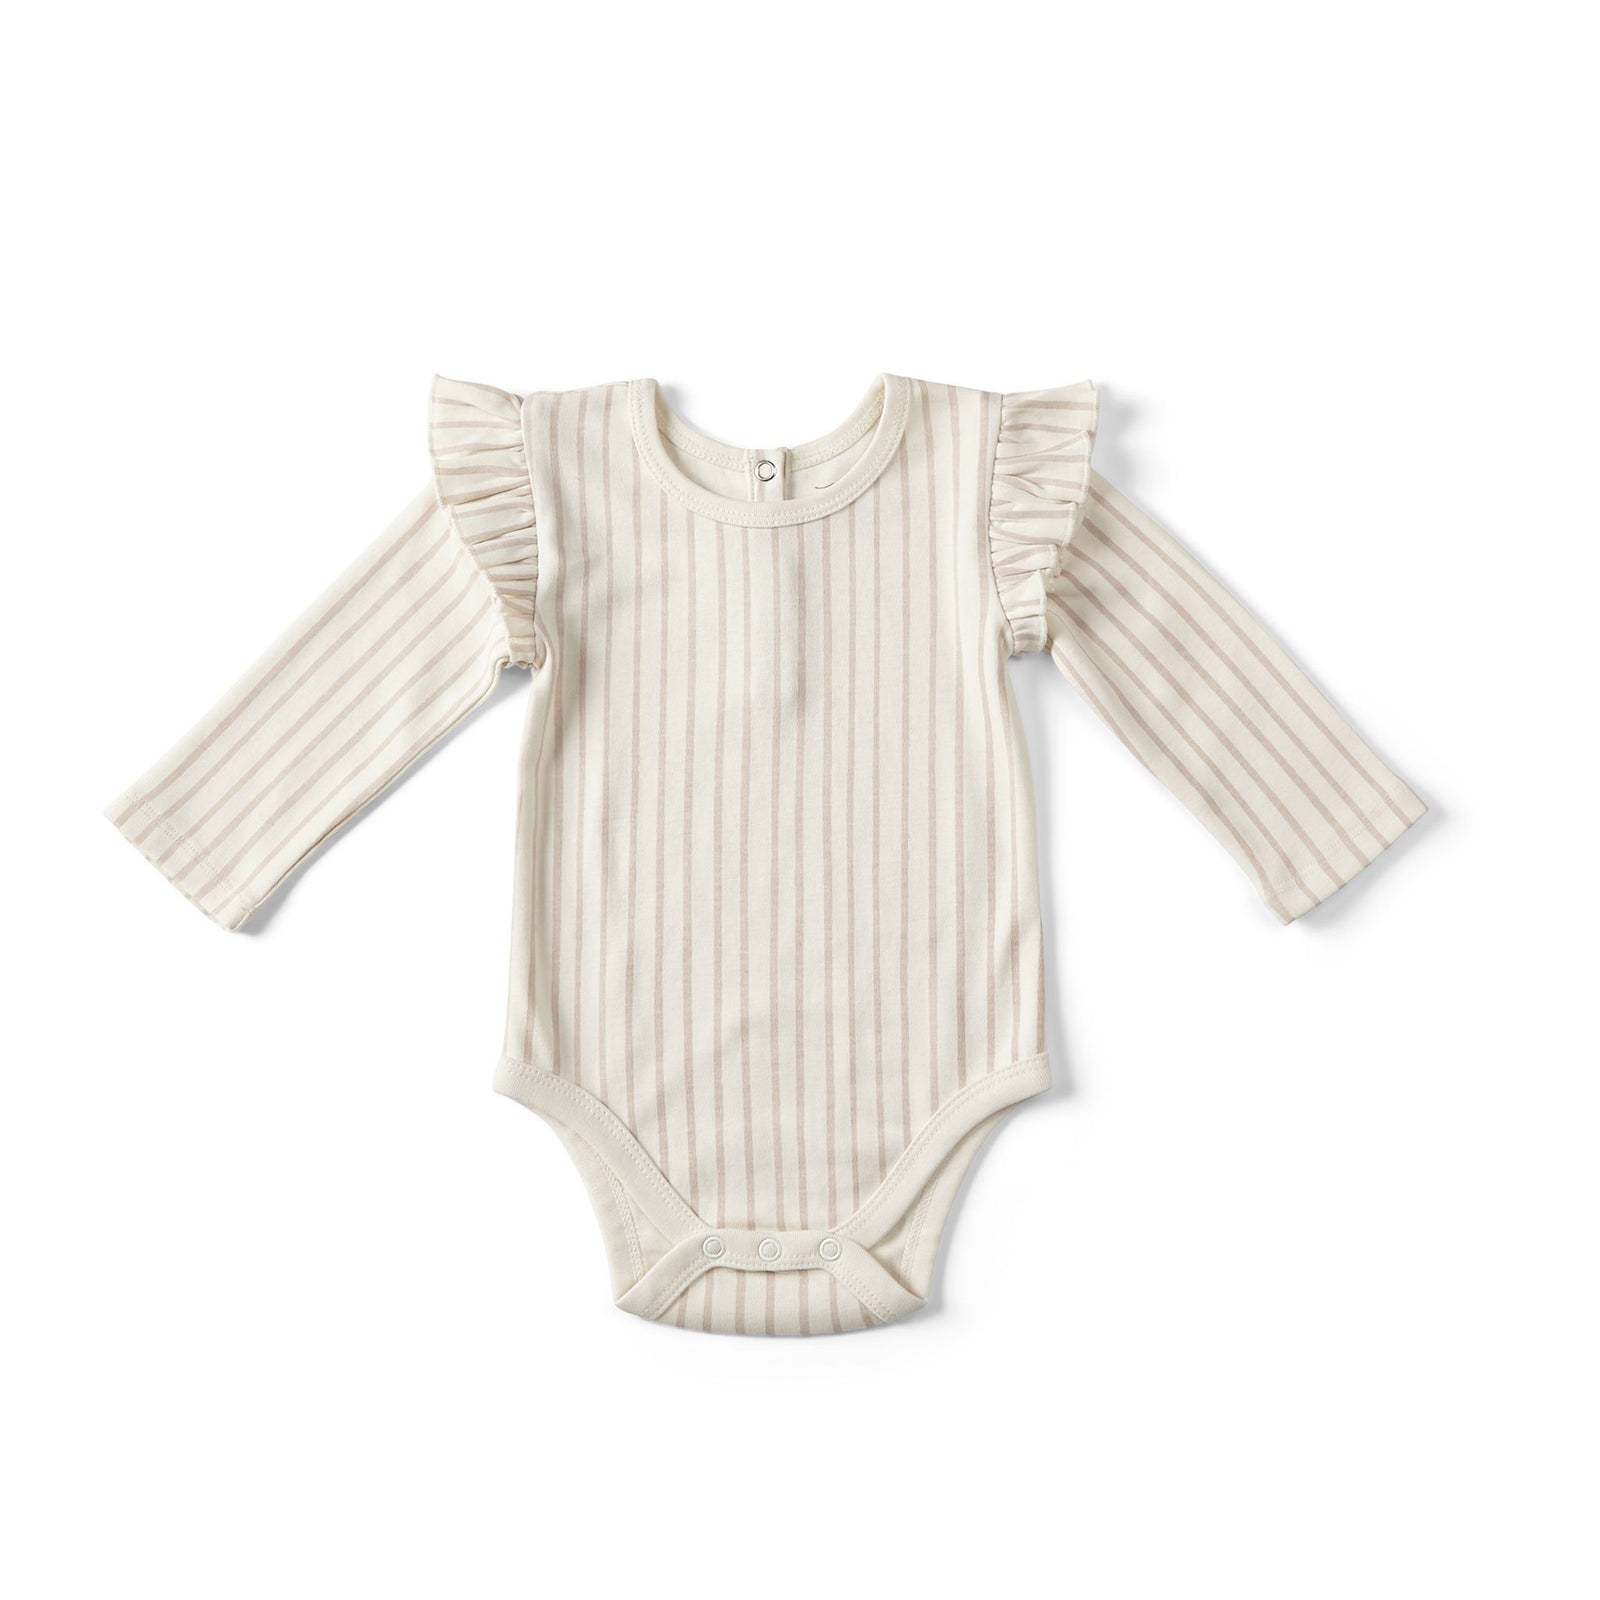 Pehr Stripes Away Petal with Ruffle Organic One-Piece, Long Sleeve. GOTS Certified Organic Cotton & Dyes. White with light pink stripes, long sleeve, ruffles on shoulders, button closure at bottom.